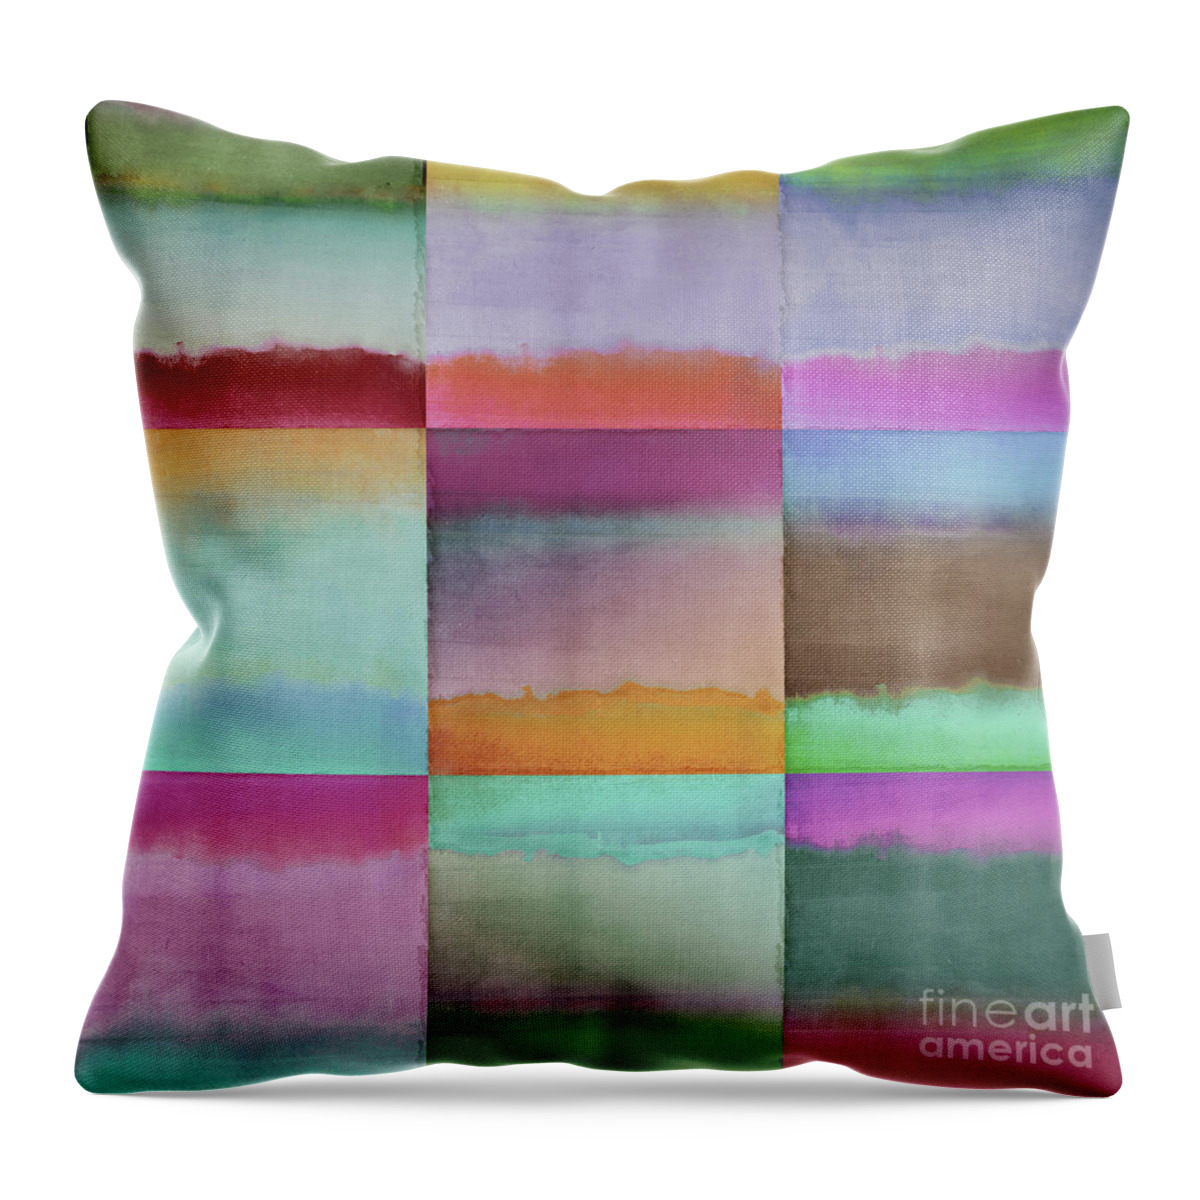 Gradients Throw Pillow featuring the painting Distant Shores by Mindy Sommers